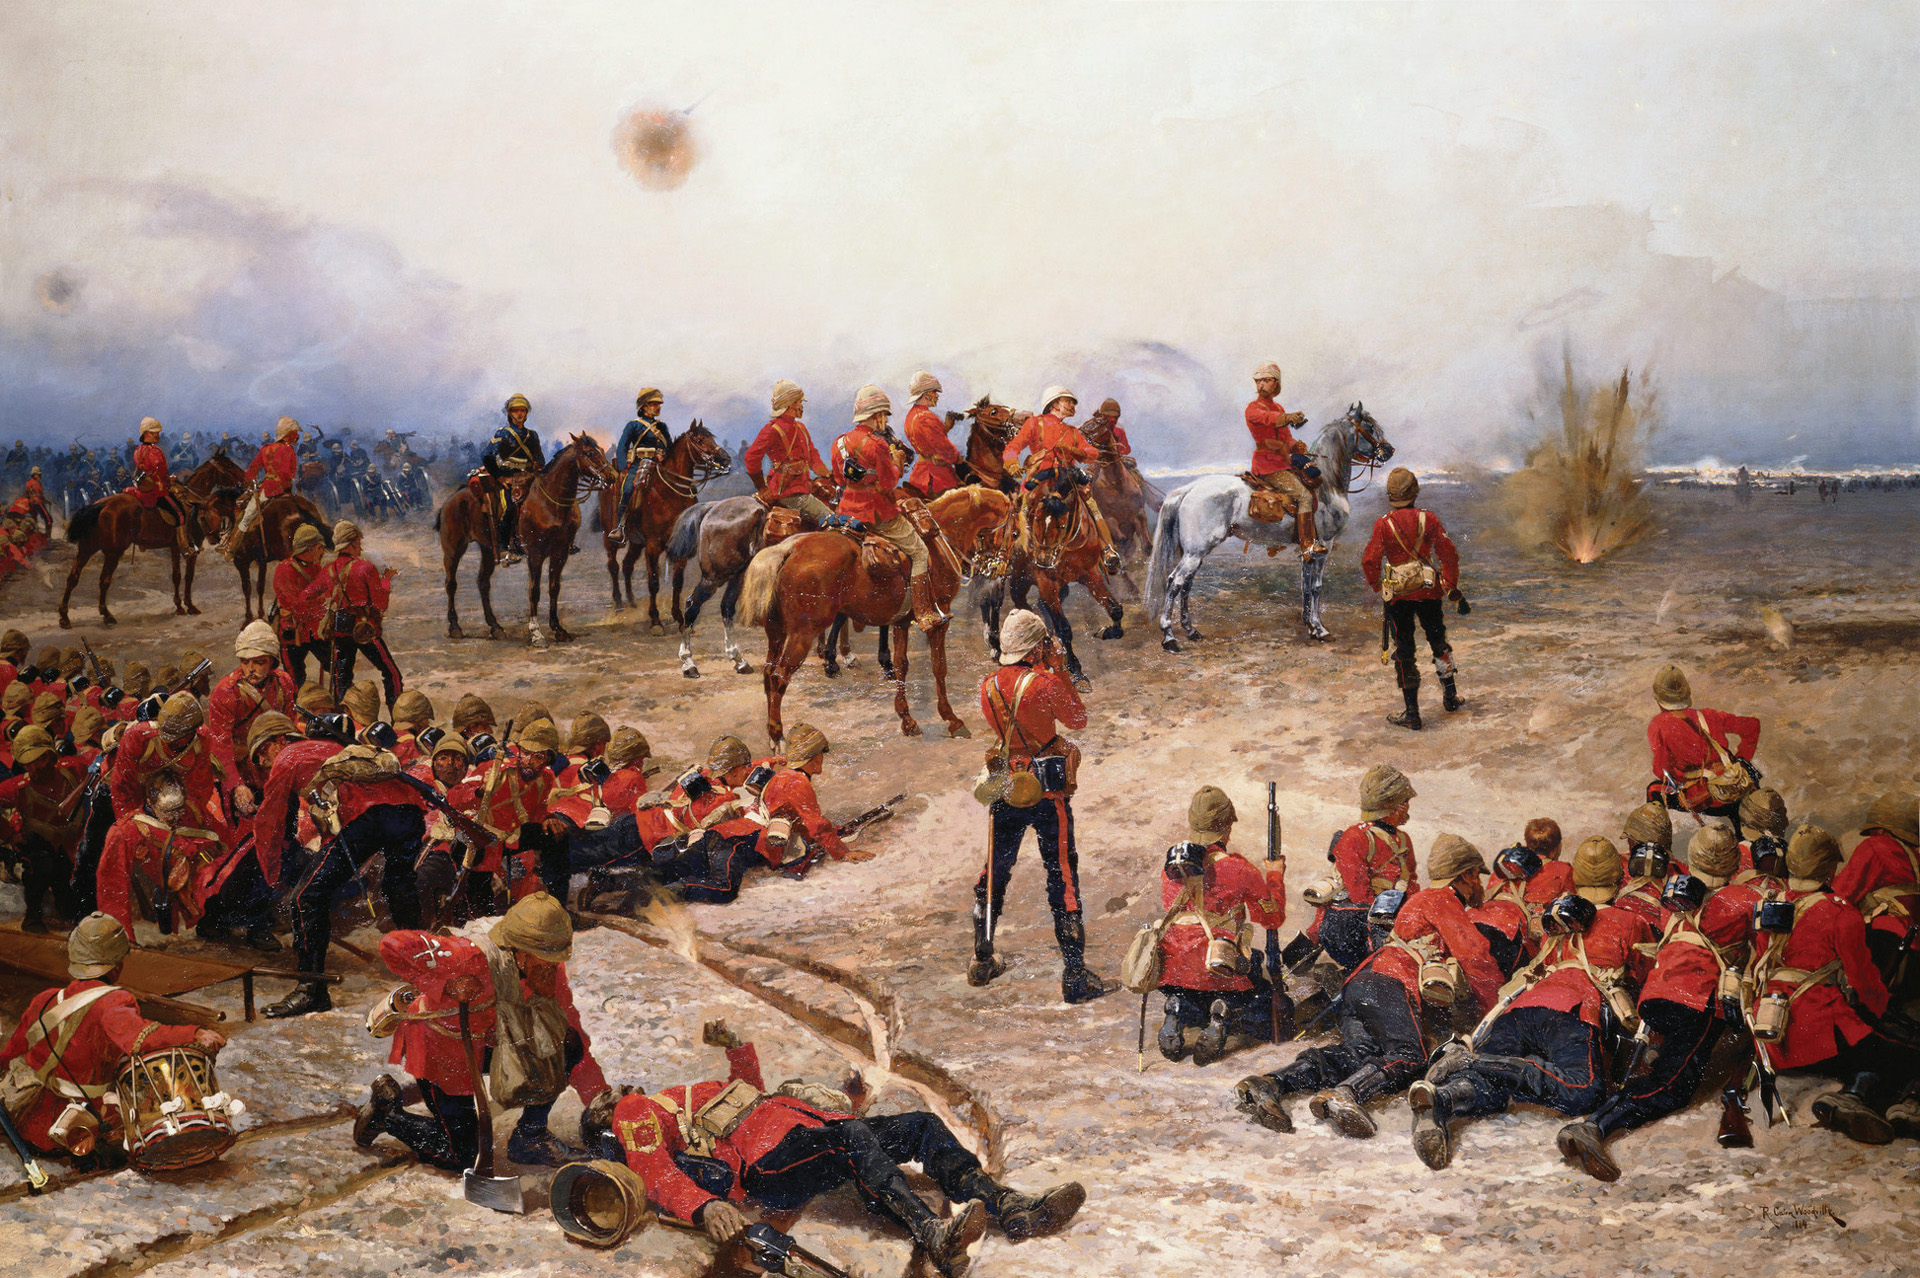 Mounted on a grey horse, Maj. Gen. Prince Arthur, the Duke of Connaught and the third son of Queen Victoria, directs the Guards Brigade in the final attack.